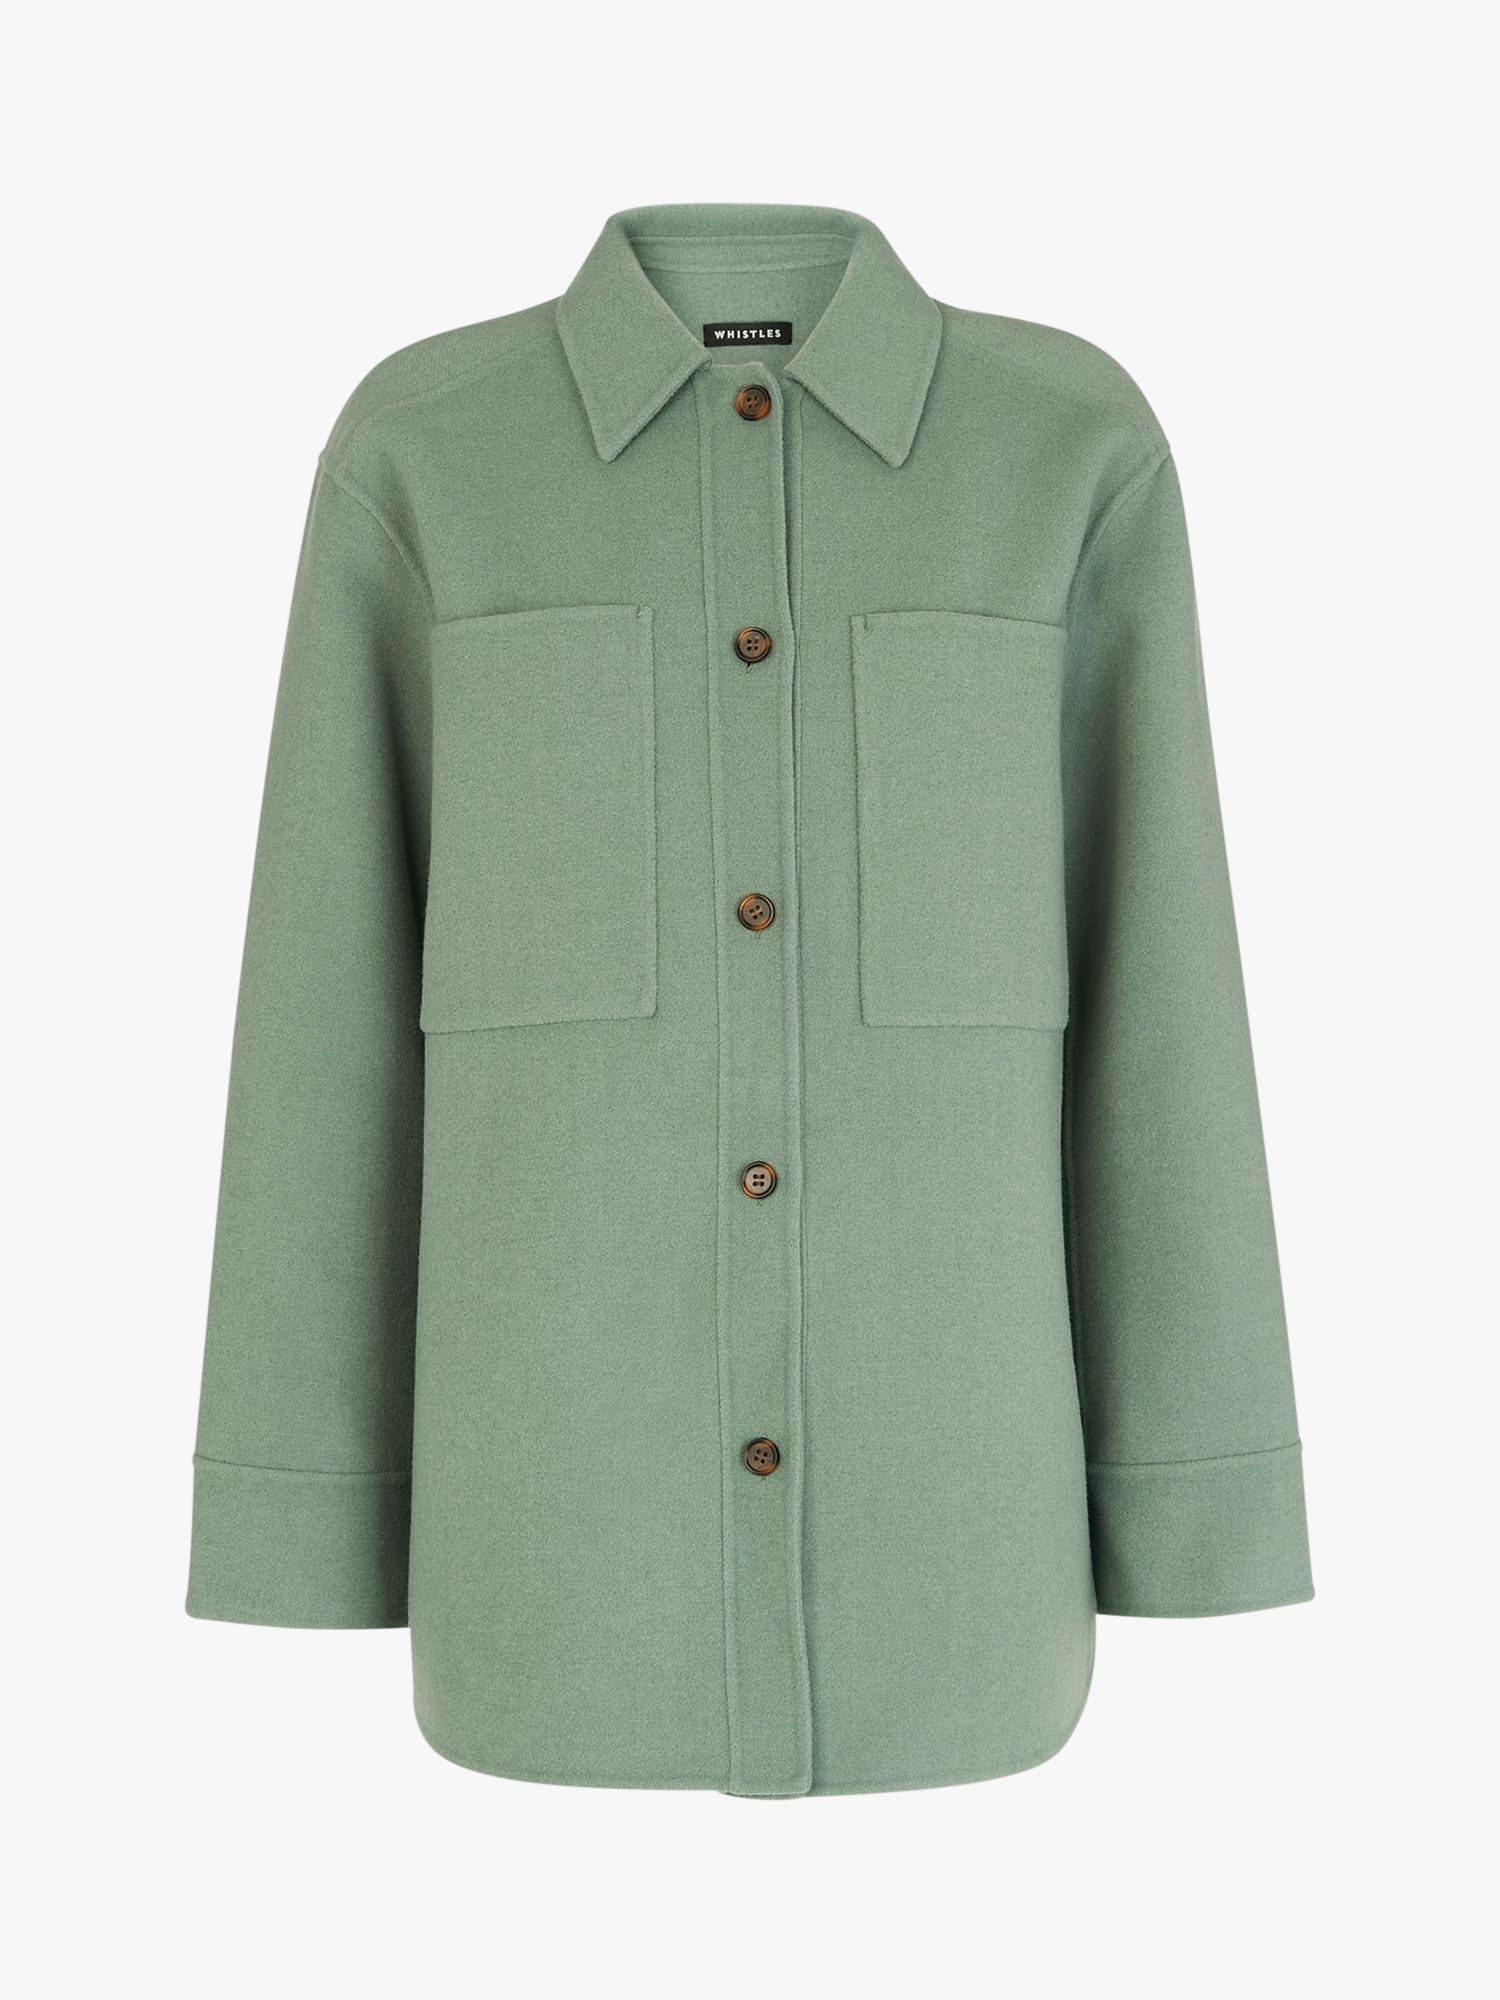 Whistles Classic Wool Blend Overshirt, Pale Green at John Lewis & Partners